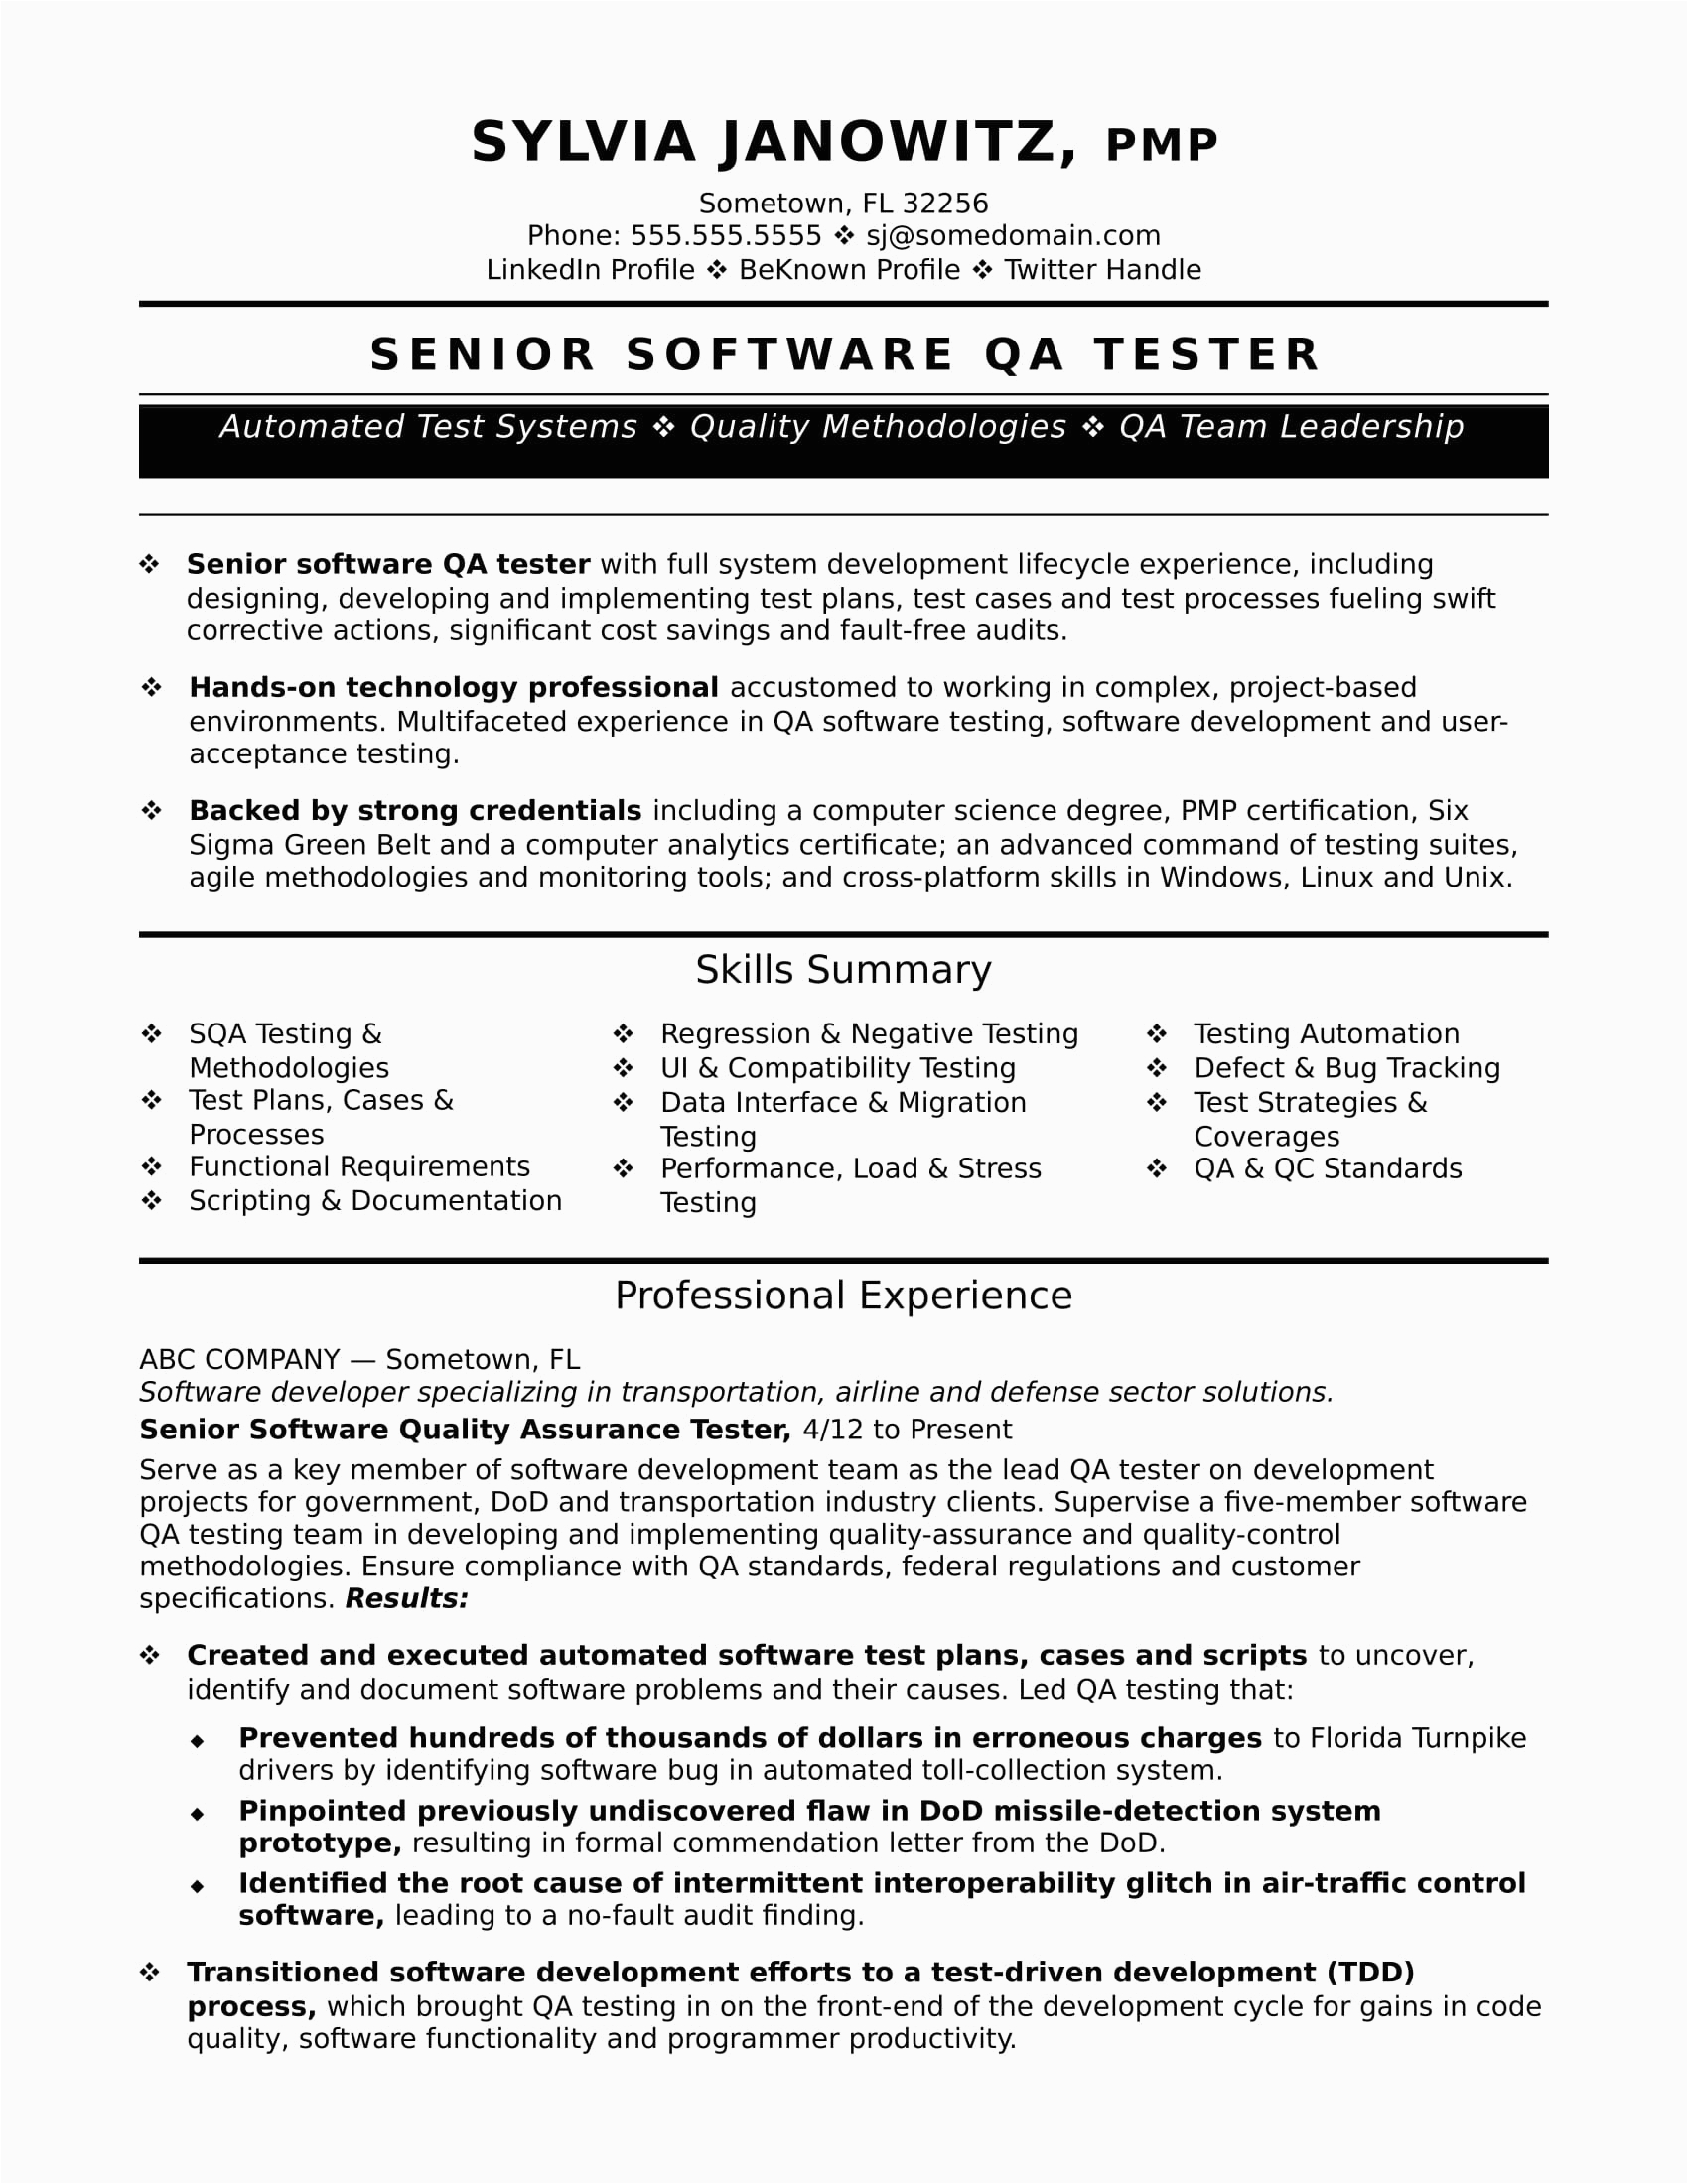 Experienced Resume Samples Of software Tester Experienced Qa software Tester Resume Sample